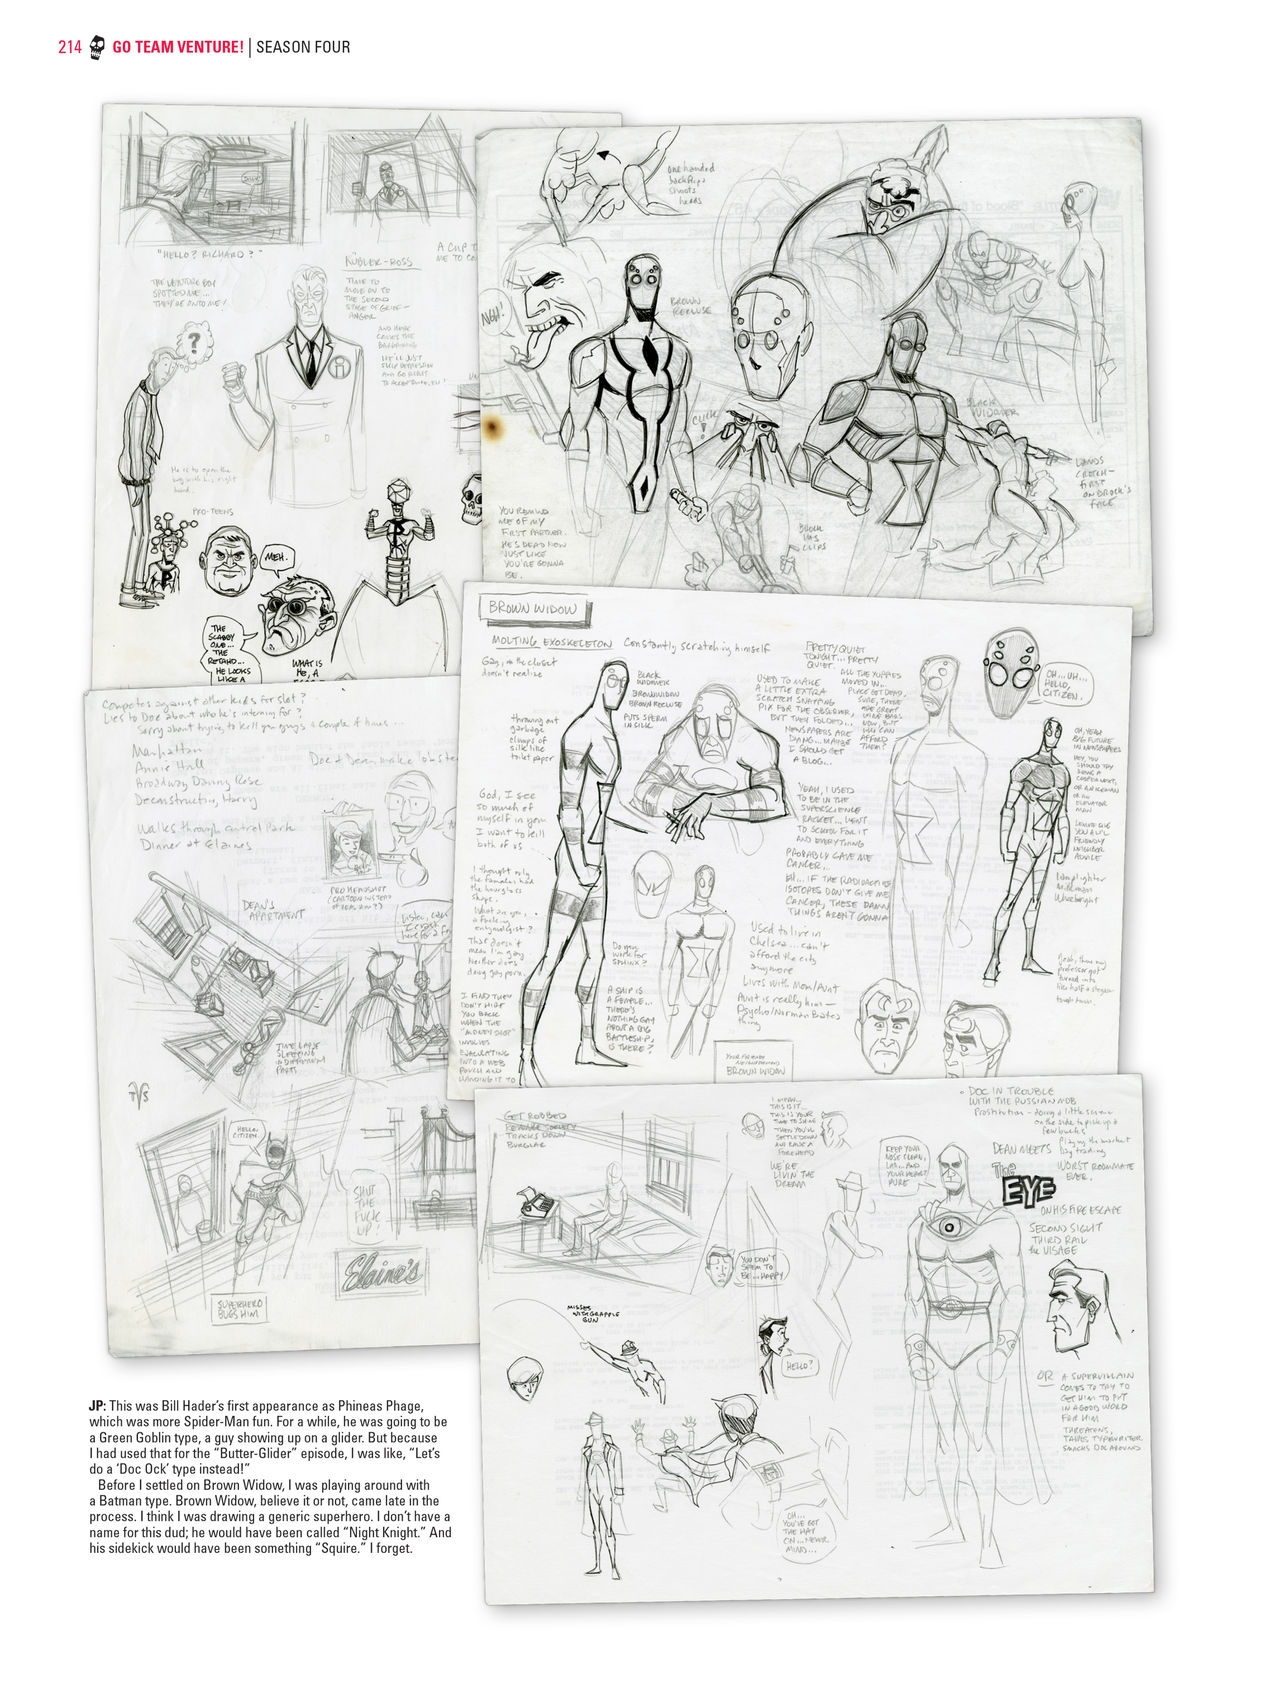 Go Team Venture! - The Art and Making of the Venture Bros 212